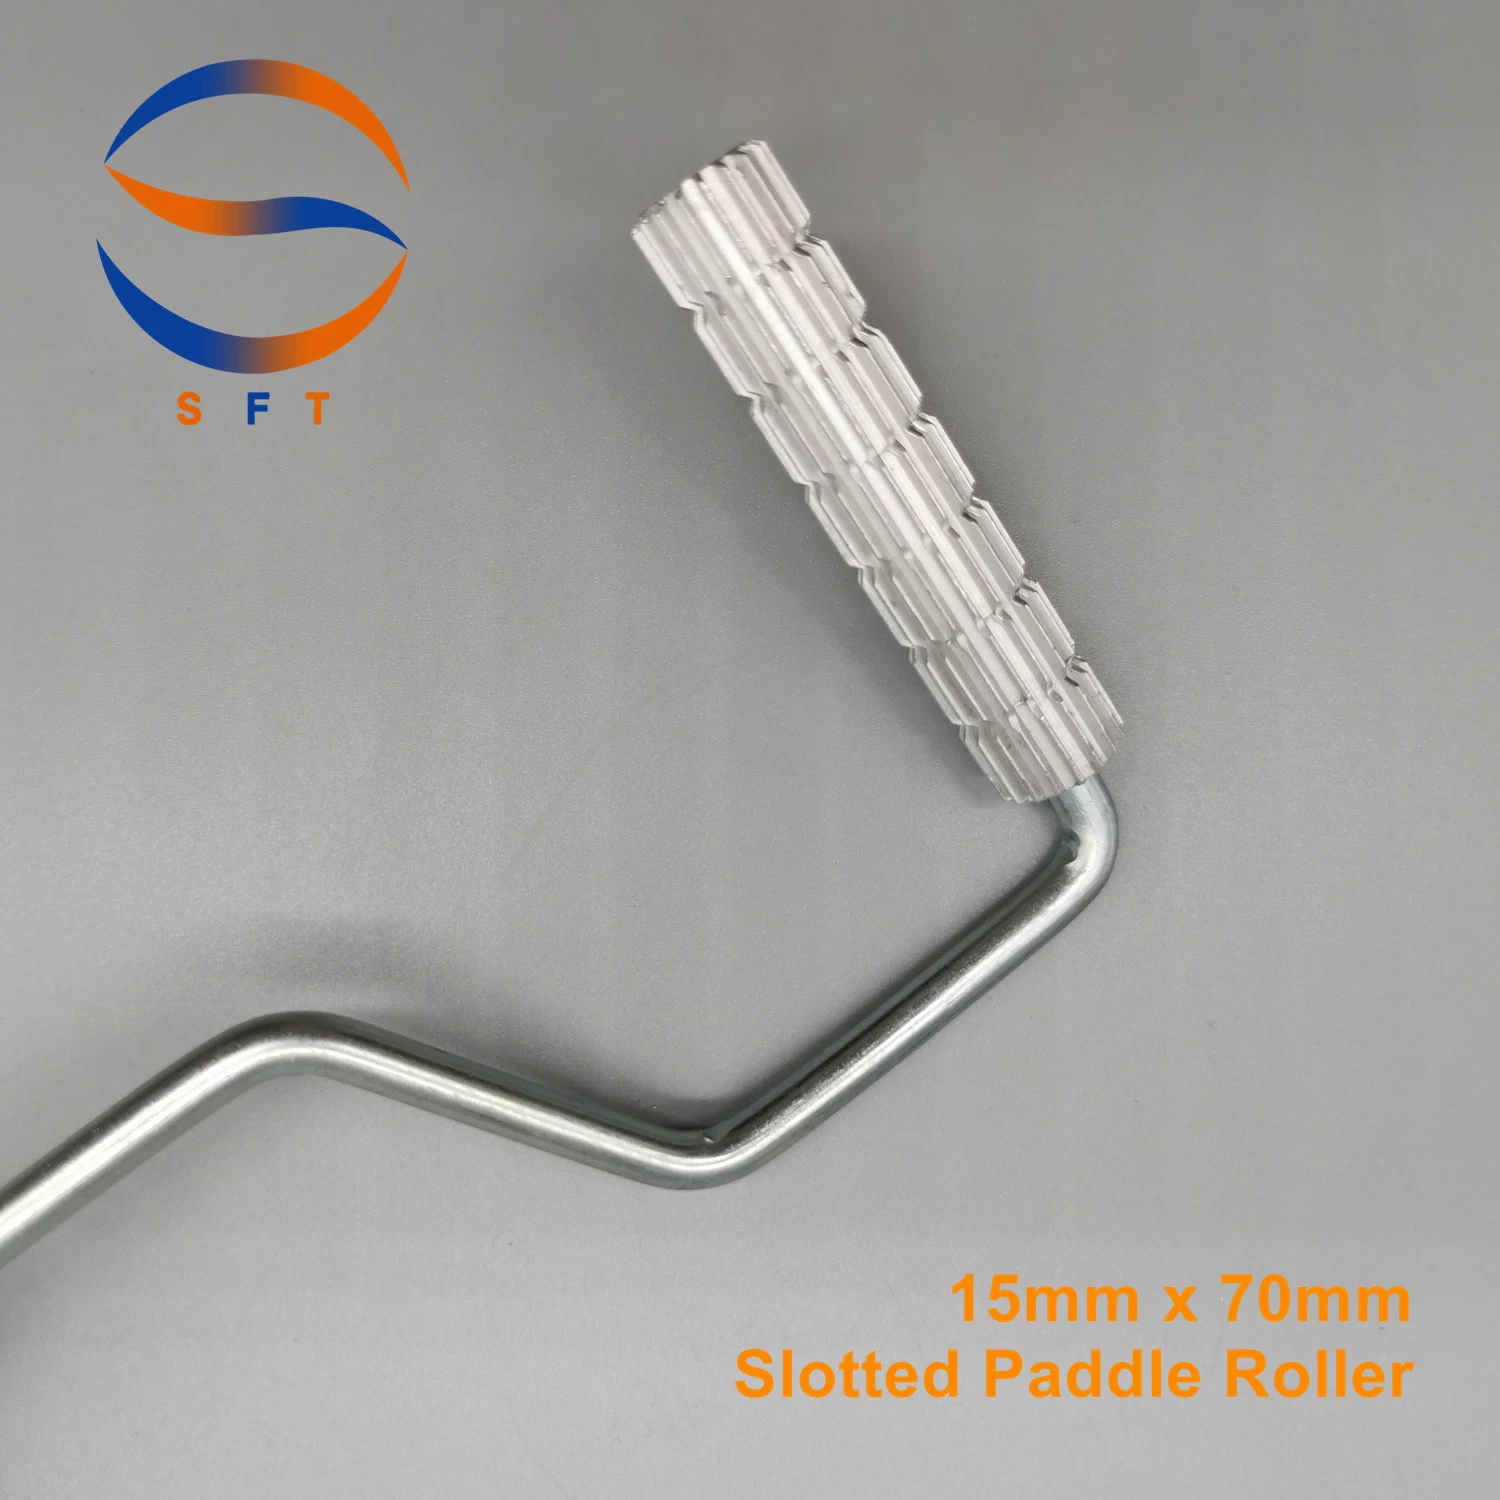 Discount Aluminium Slotted Paddle Rollers Paint Tools for FRP Laminates